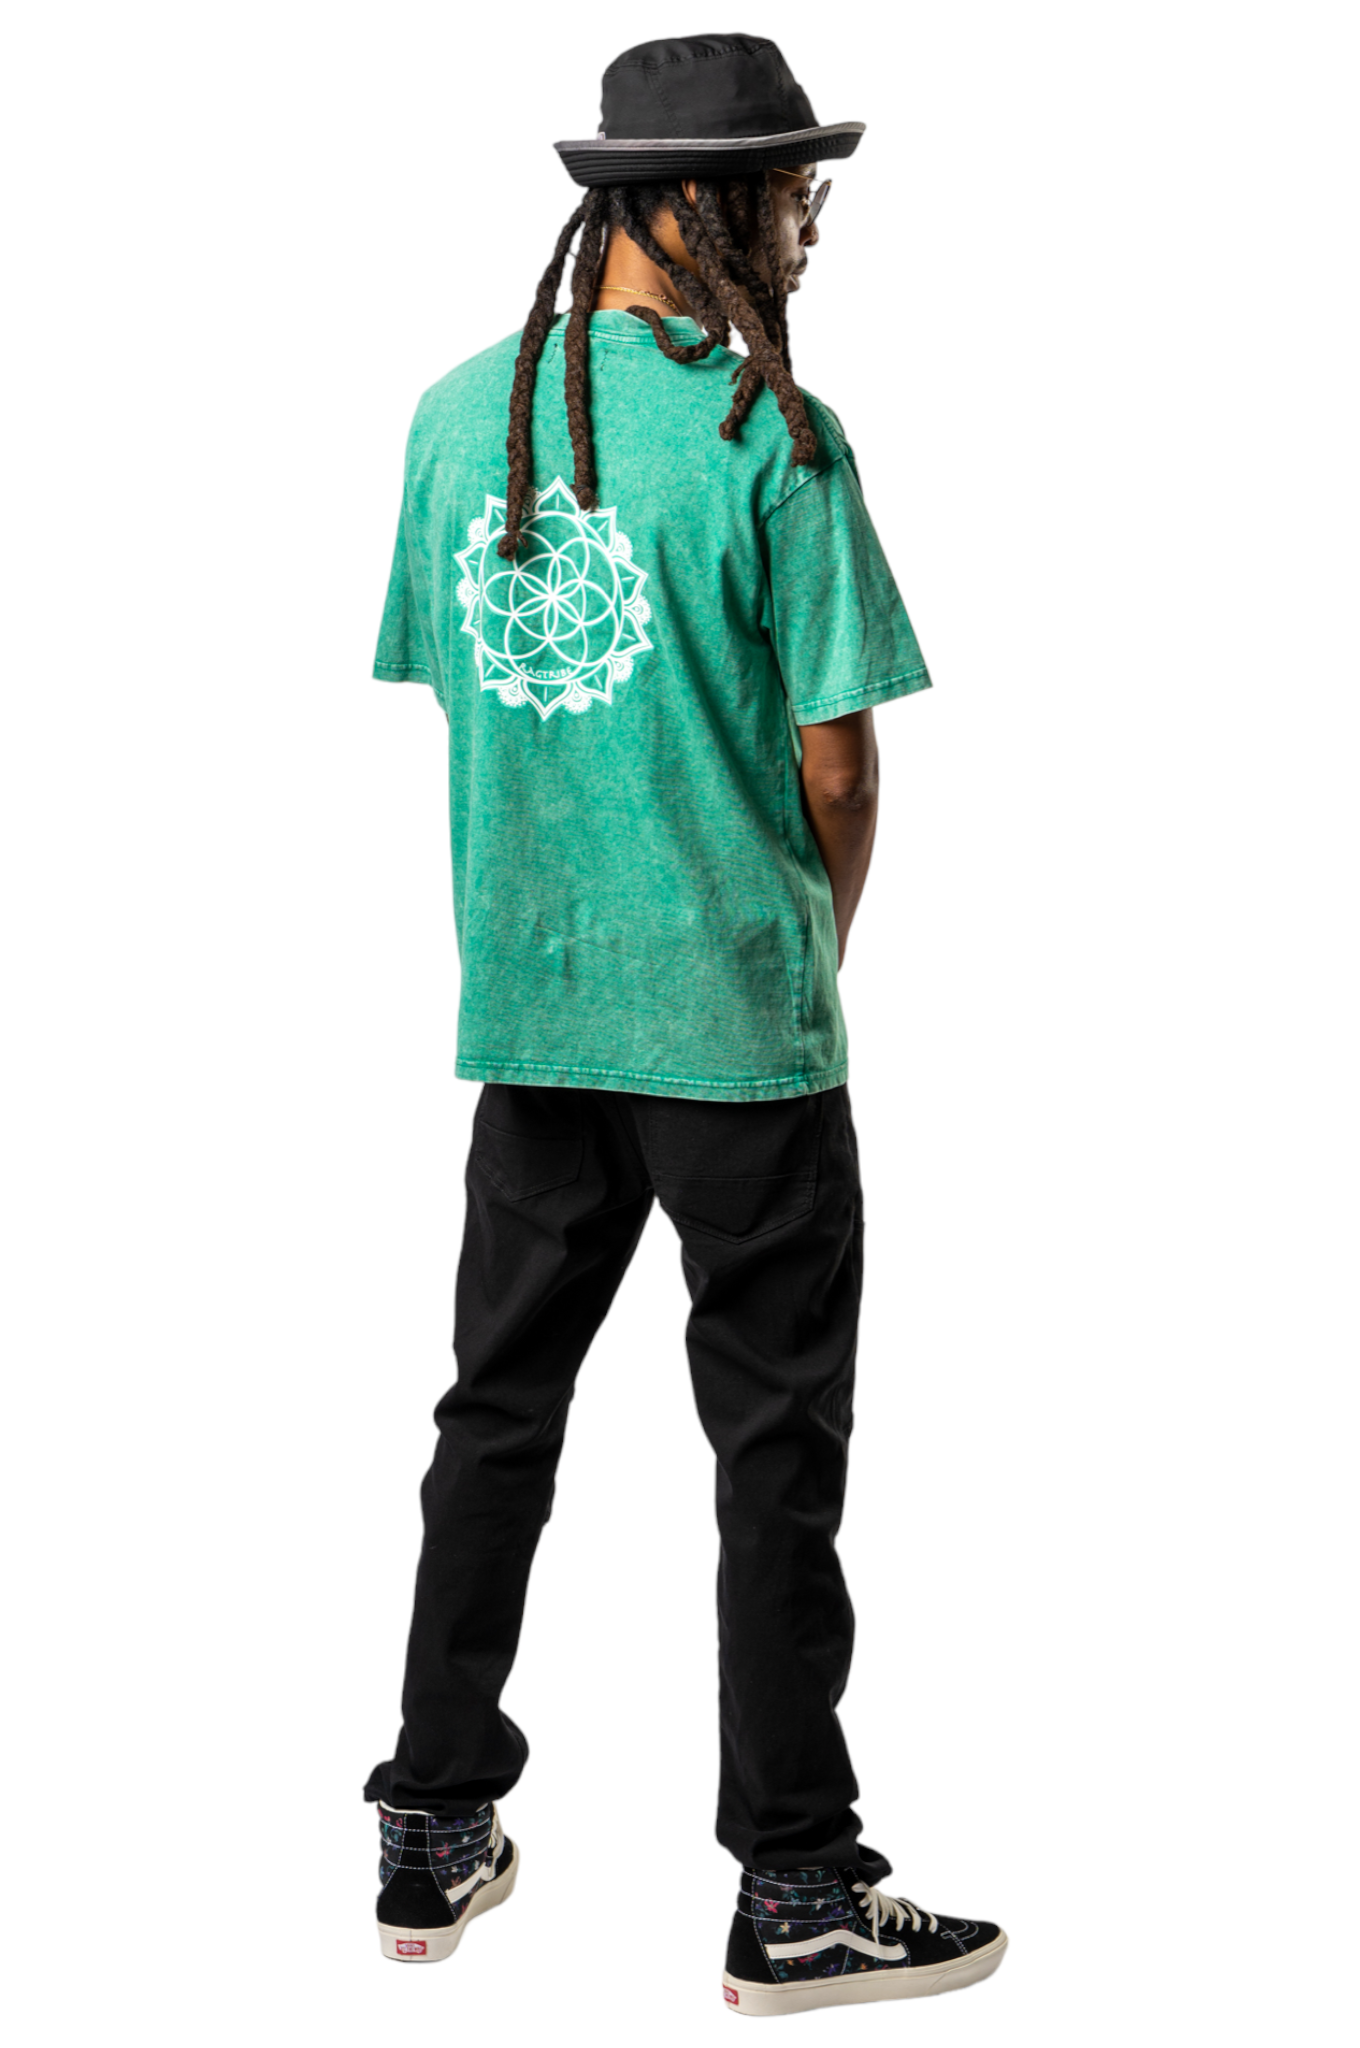 The Evolve Tee - Ragtribe Ethical Clothing & Productions, LLC